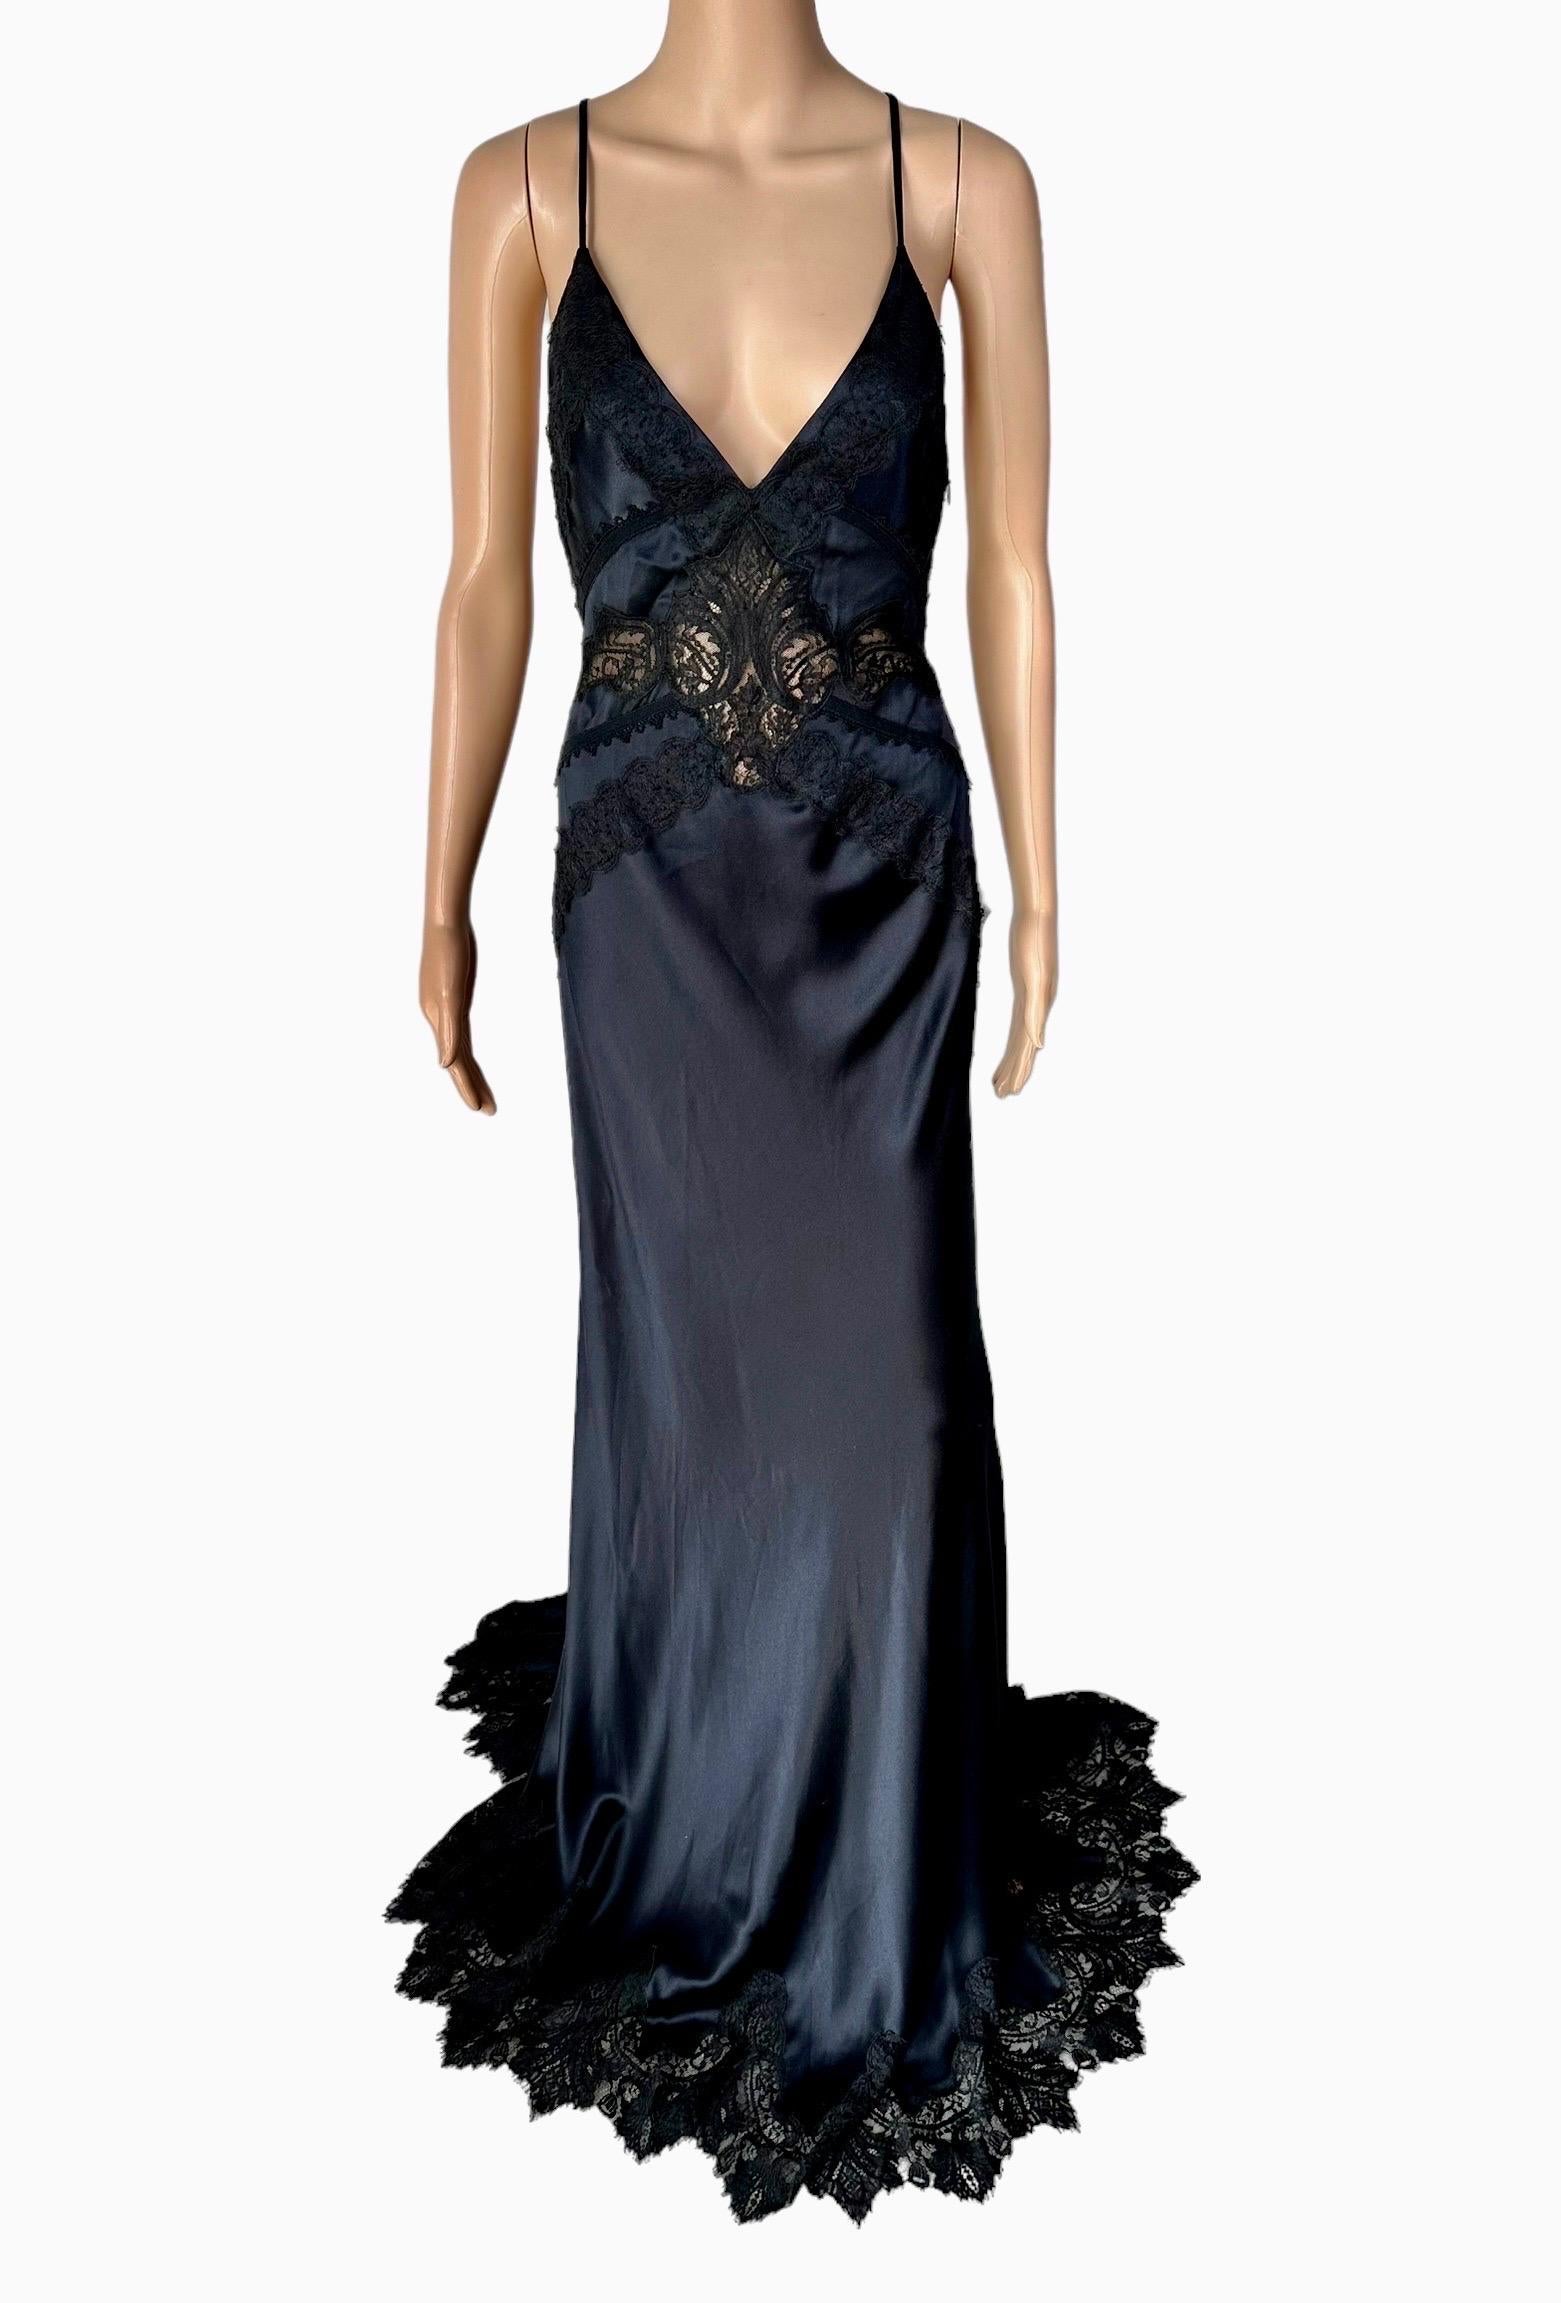 Versace c.2006 Plunging Neckline Sheer Lace Panels Backless Evening Dress Gown  For Sale 5